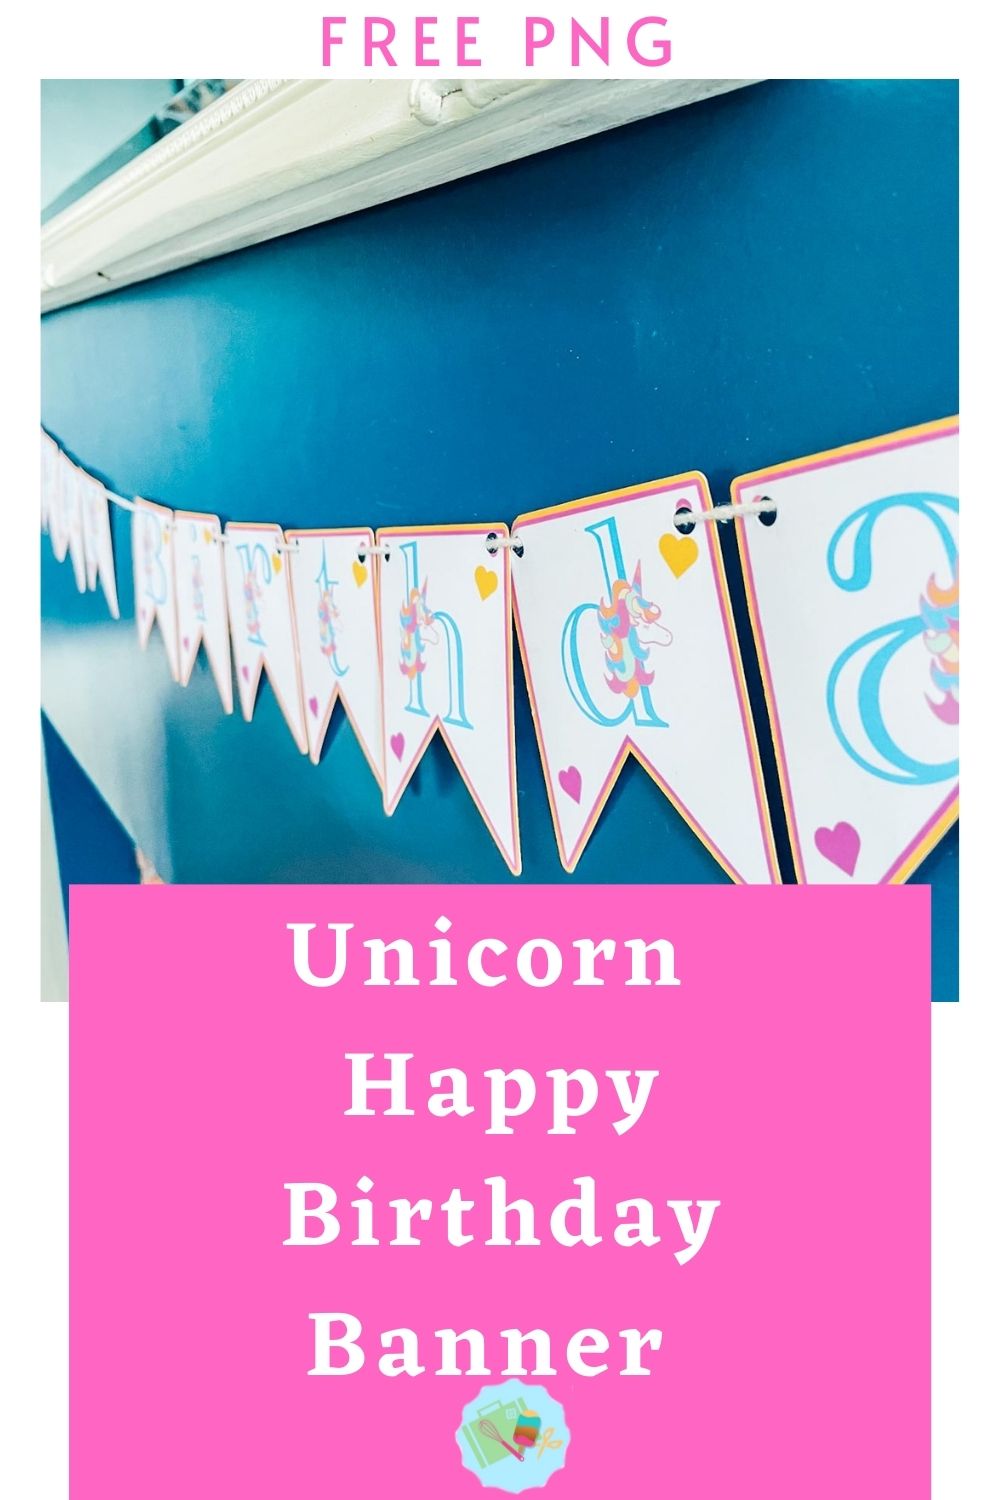 Free PNG Unicorn Happy Birthday Banner for Unicorn themed Birthday parties For Cricut Print and Cut